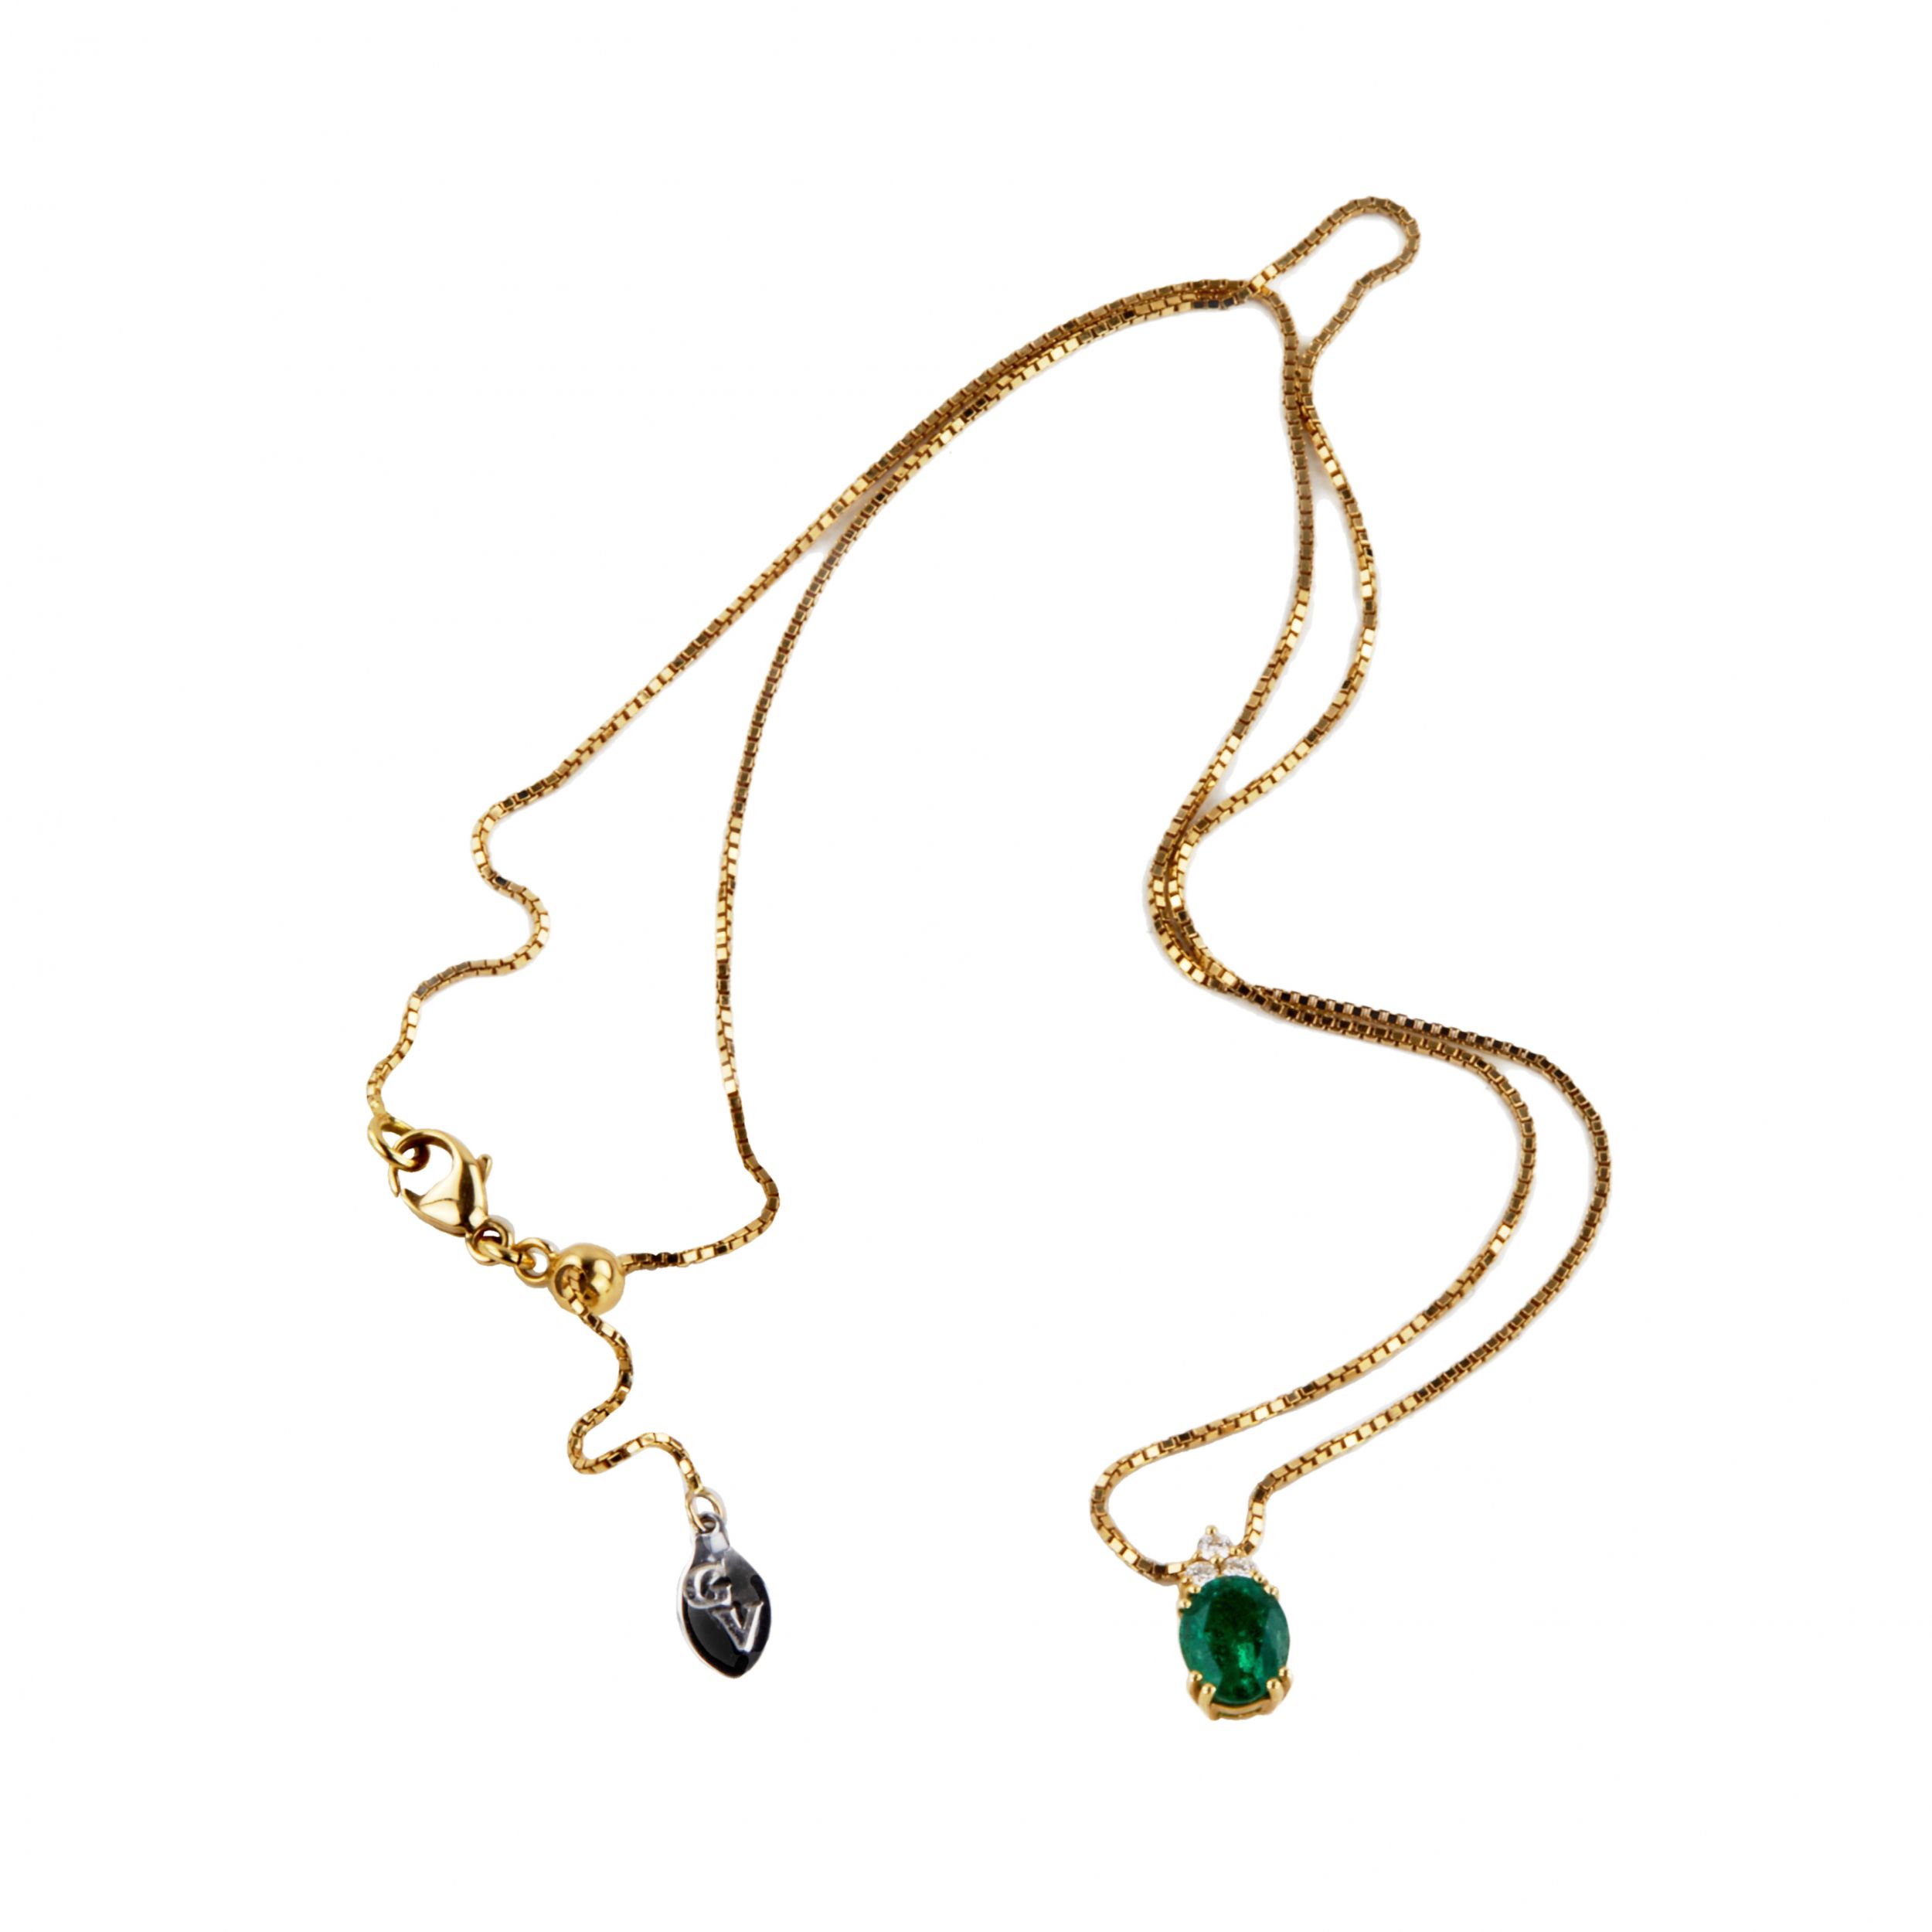 Giorgio Visconti. 18K gold pendant and earrings with emeralds and diamonds. - Image 5 of 8